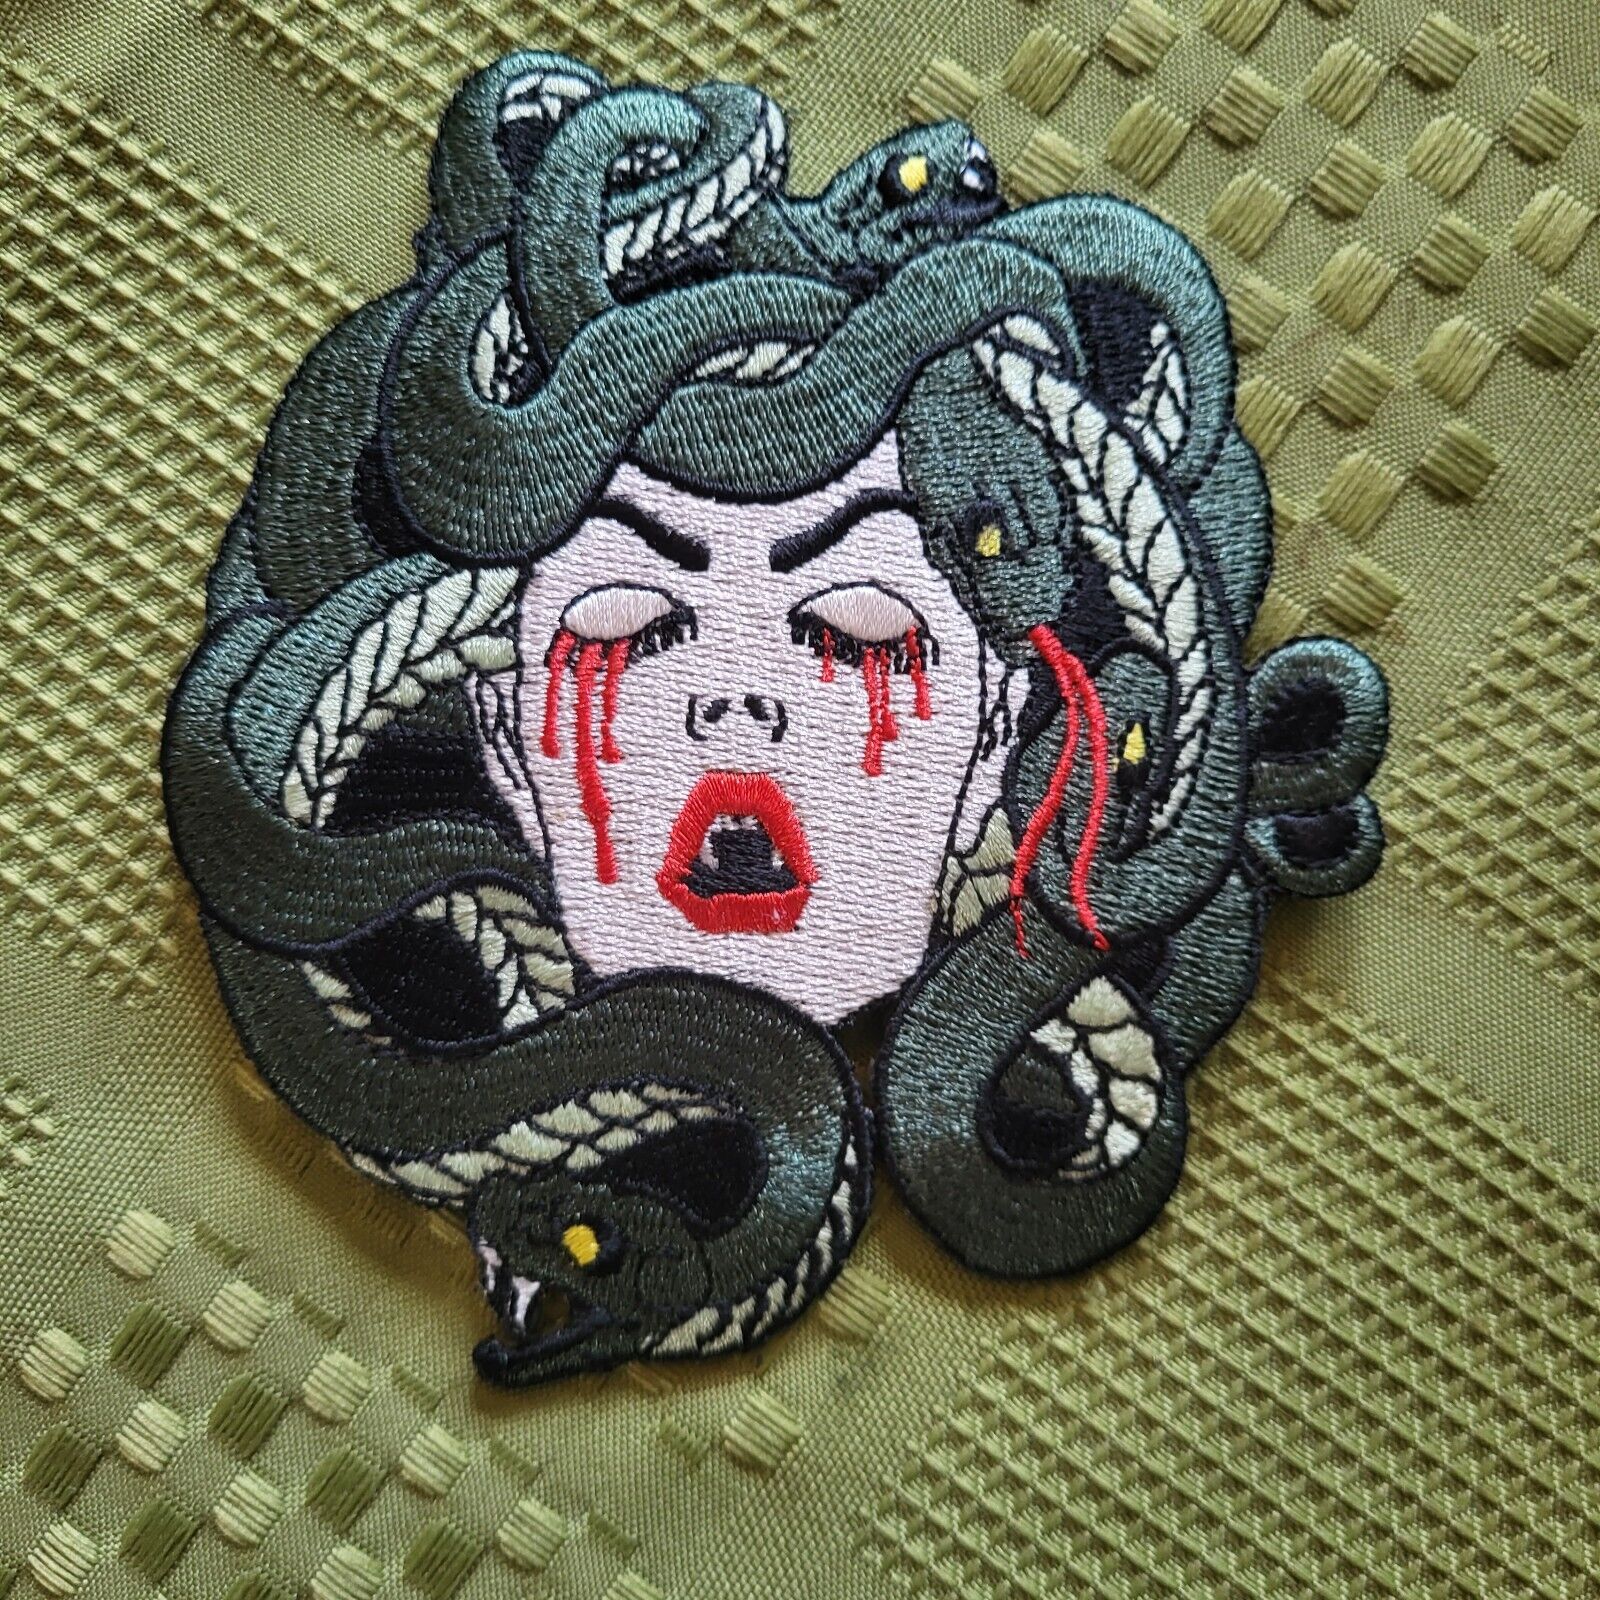 Medusa Embroidered iron on Sew on 4.0 inch Patch 